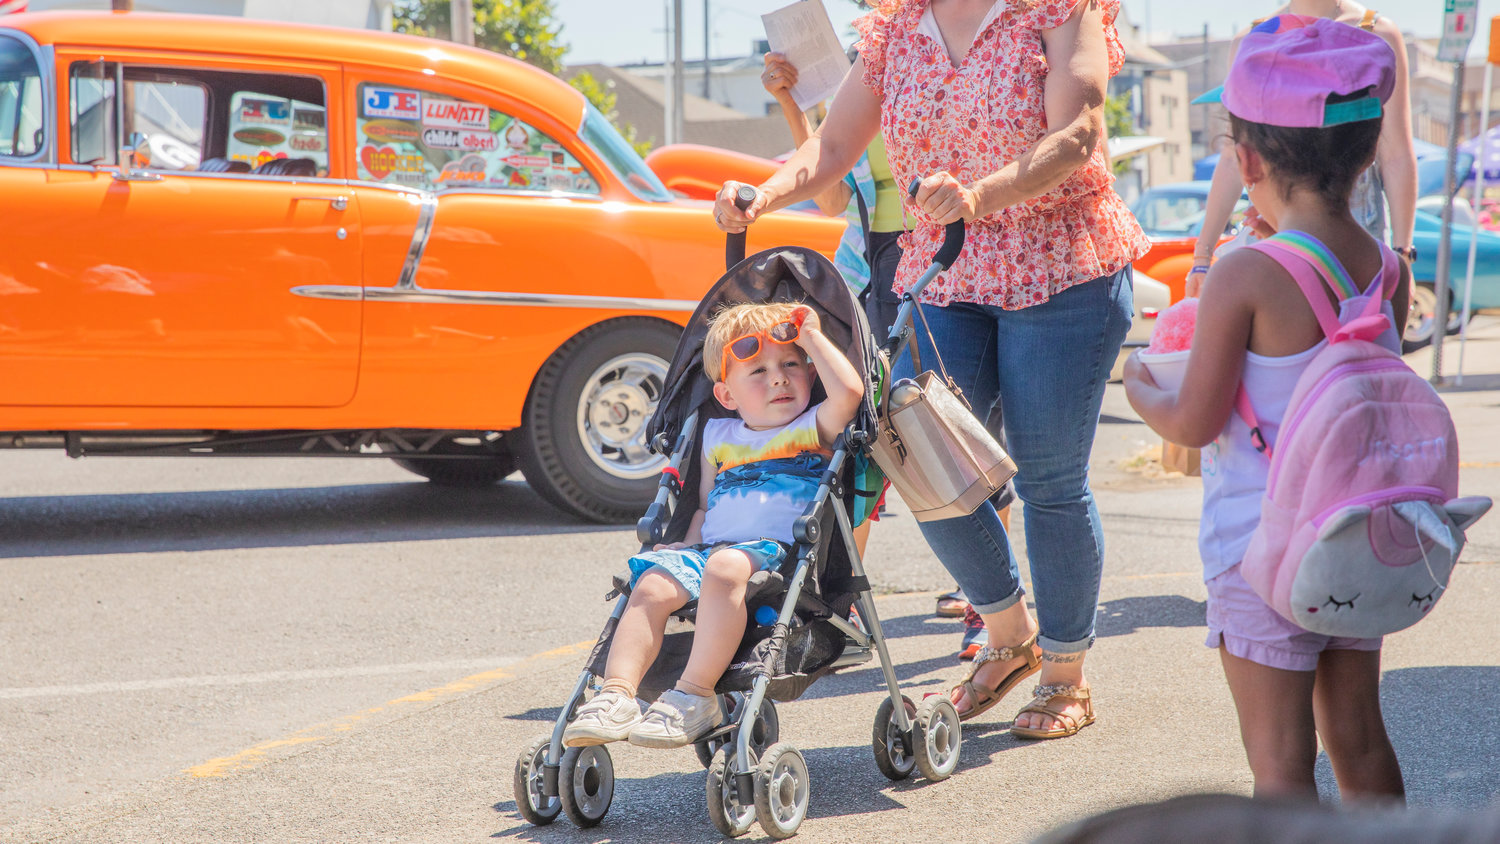 Austin Cunningham, 2,  raises his sunglasses and takes in the views as classic cars sit on display during Chehalis Fest Saturday afternoon.